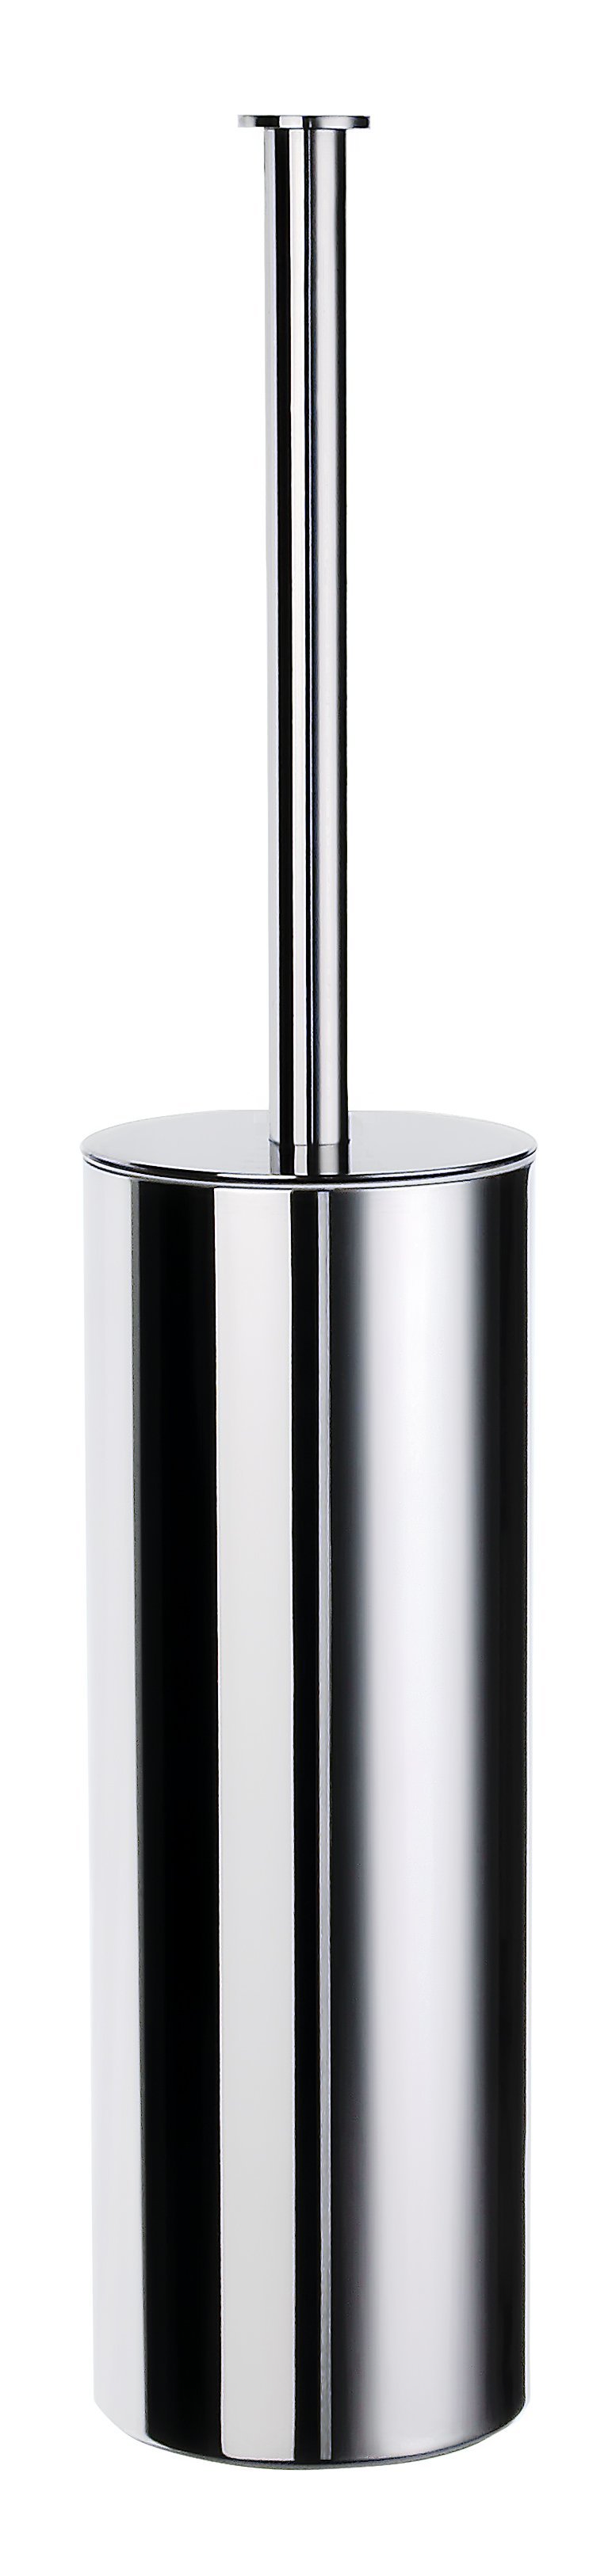 Lite Toilet Brush with Cylinder Base in Stainless Steel Polished